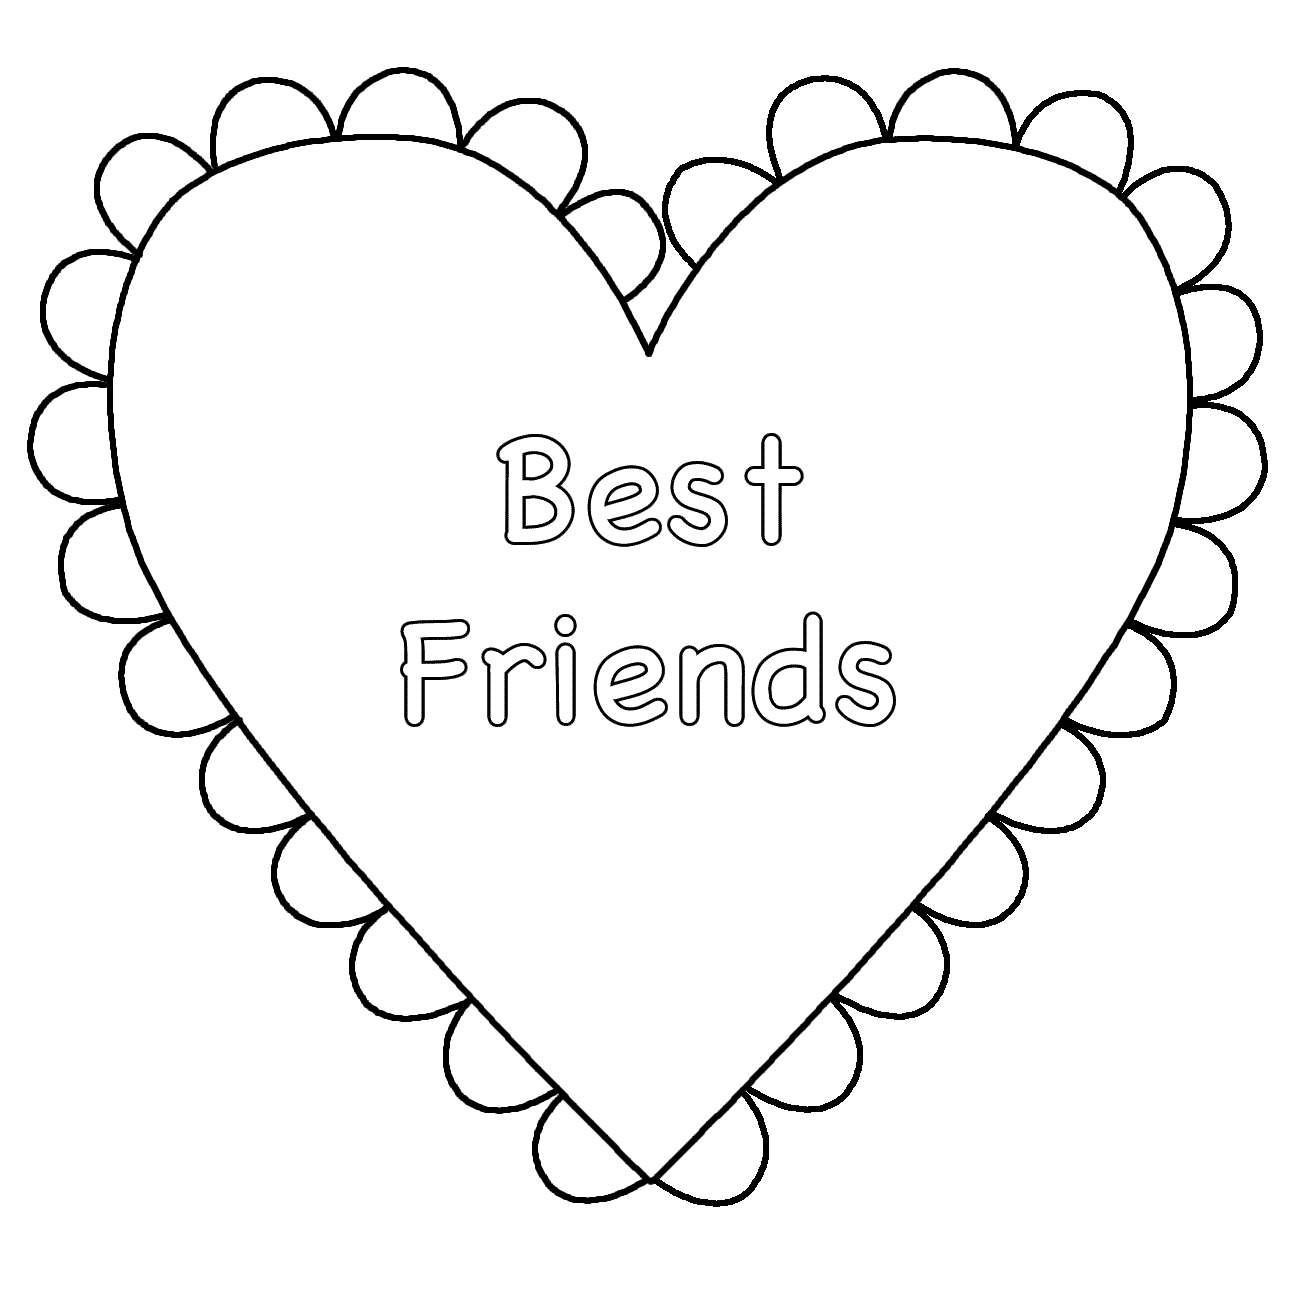 Best Friends Heart Coloring Page